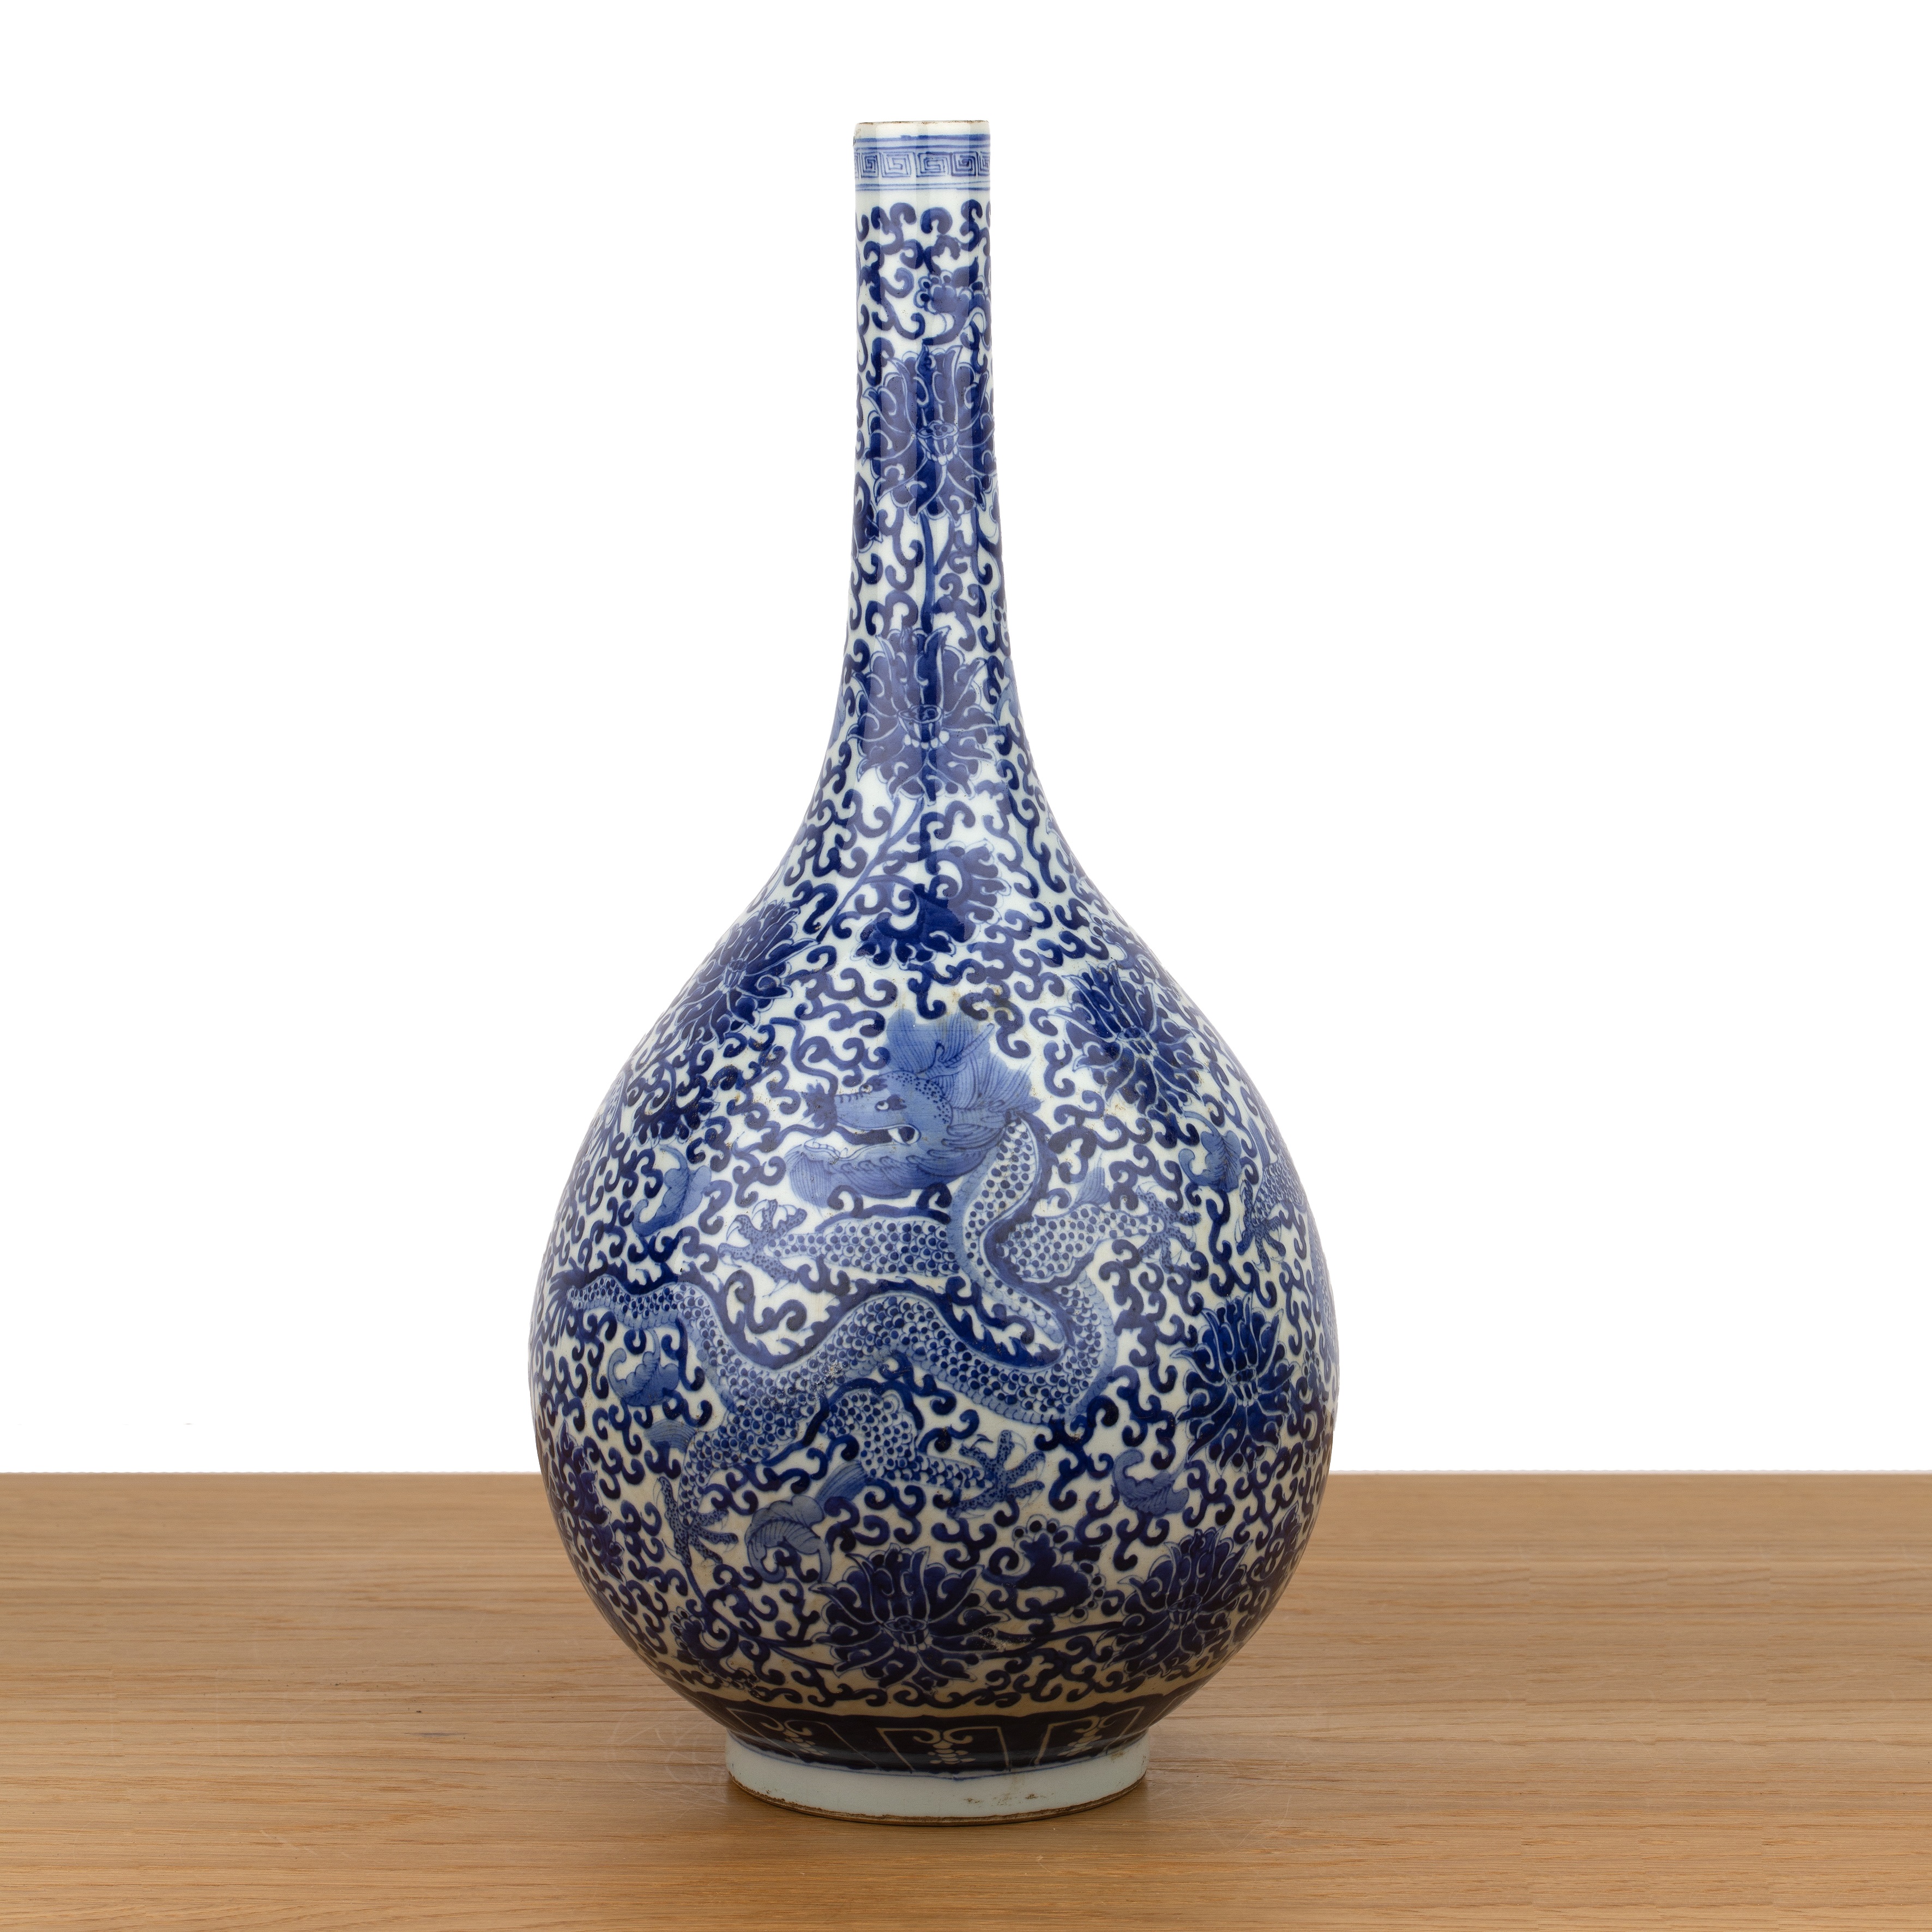 Blue and white porcelain bottle vase Chinese, early 20th Century painted with trailing dragons and